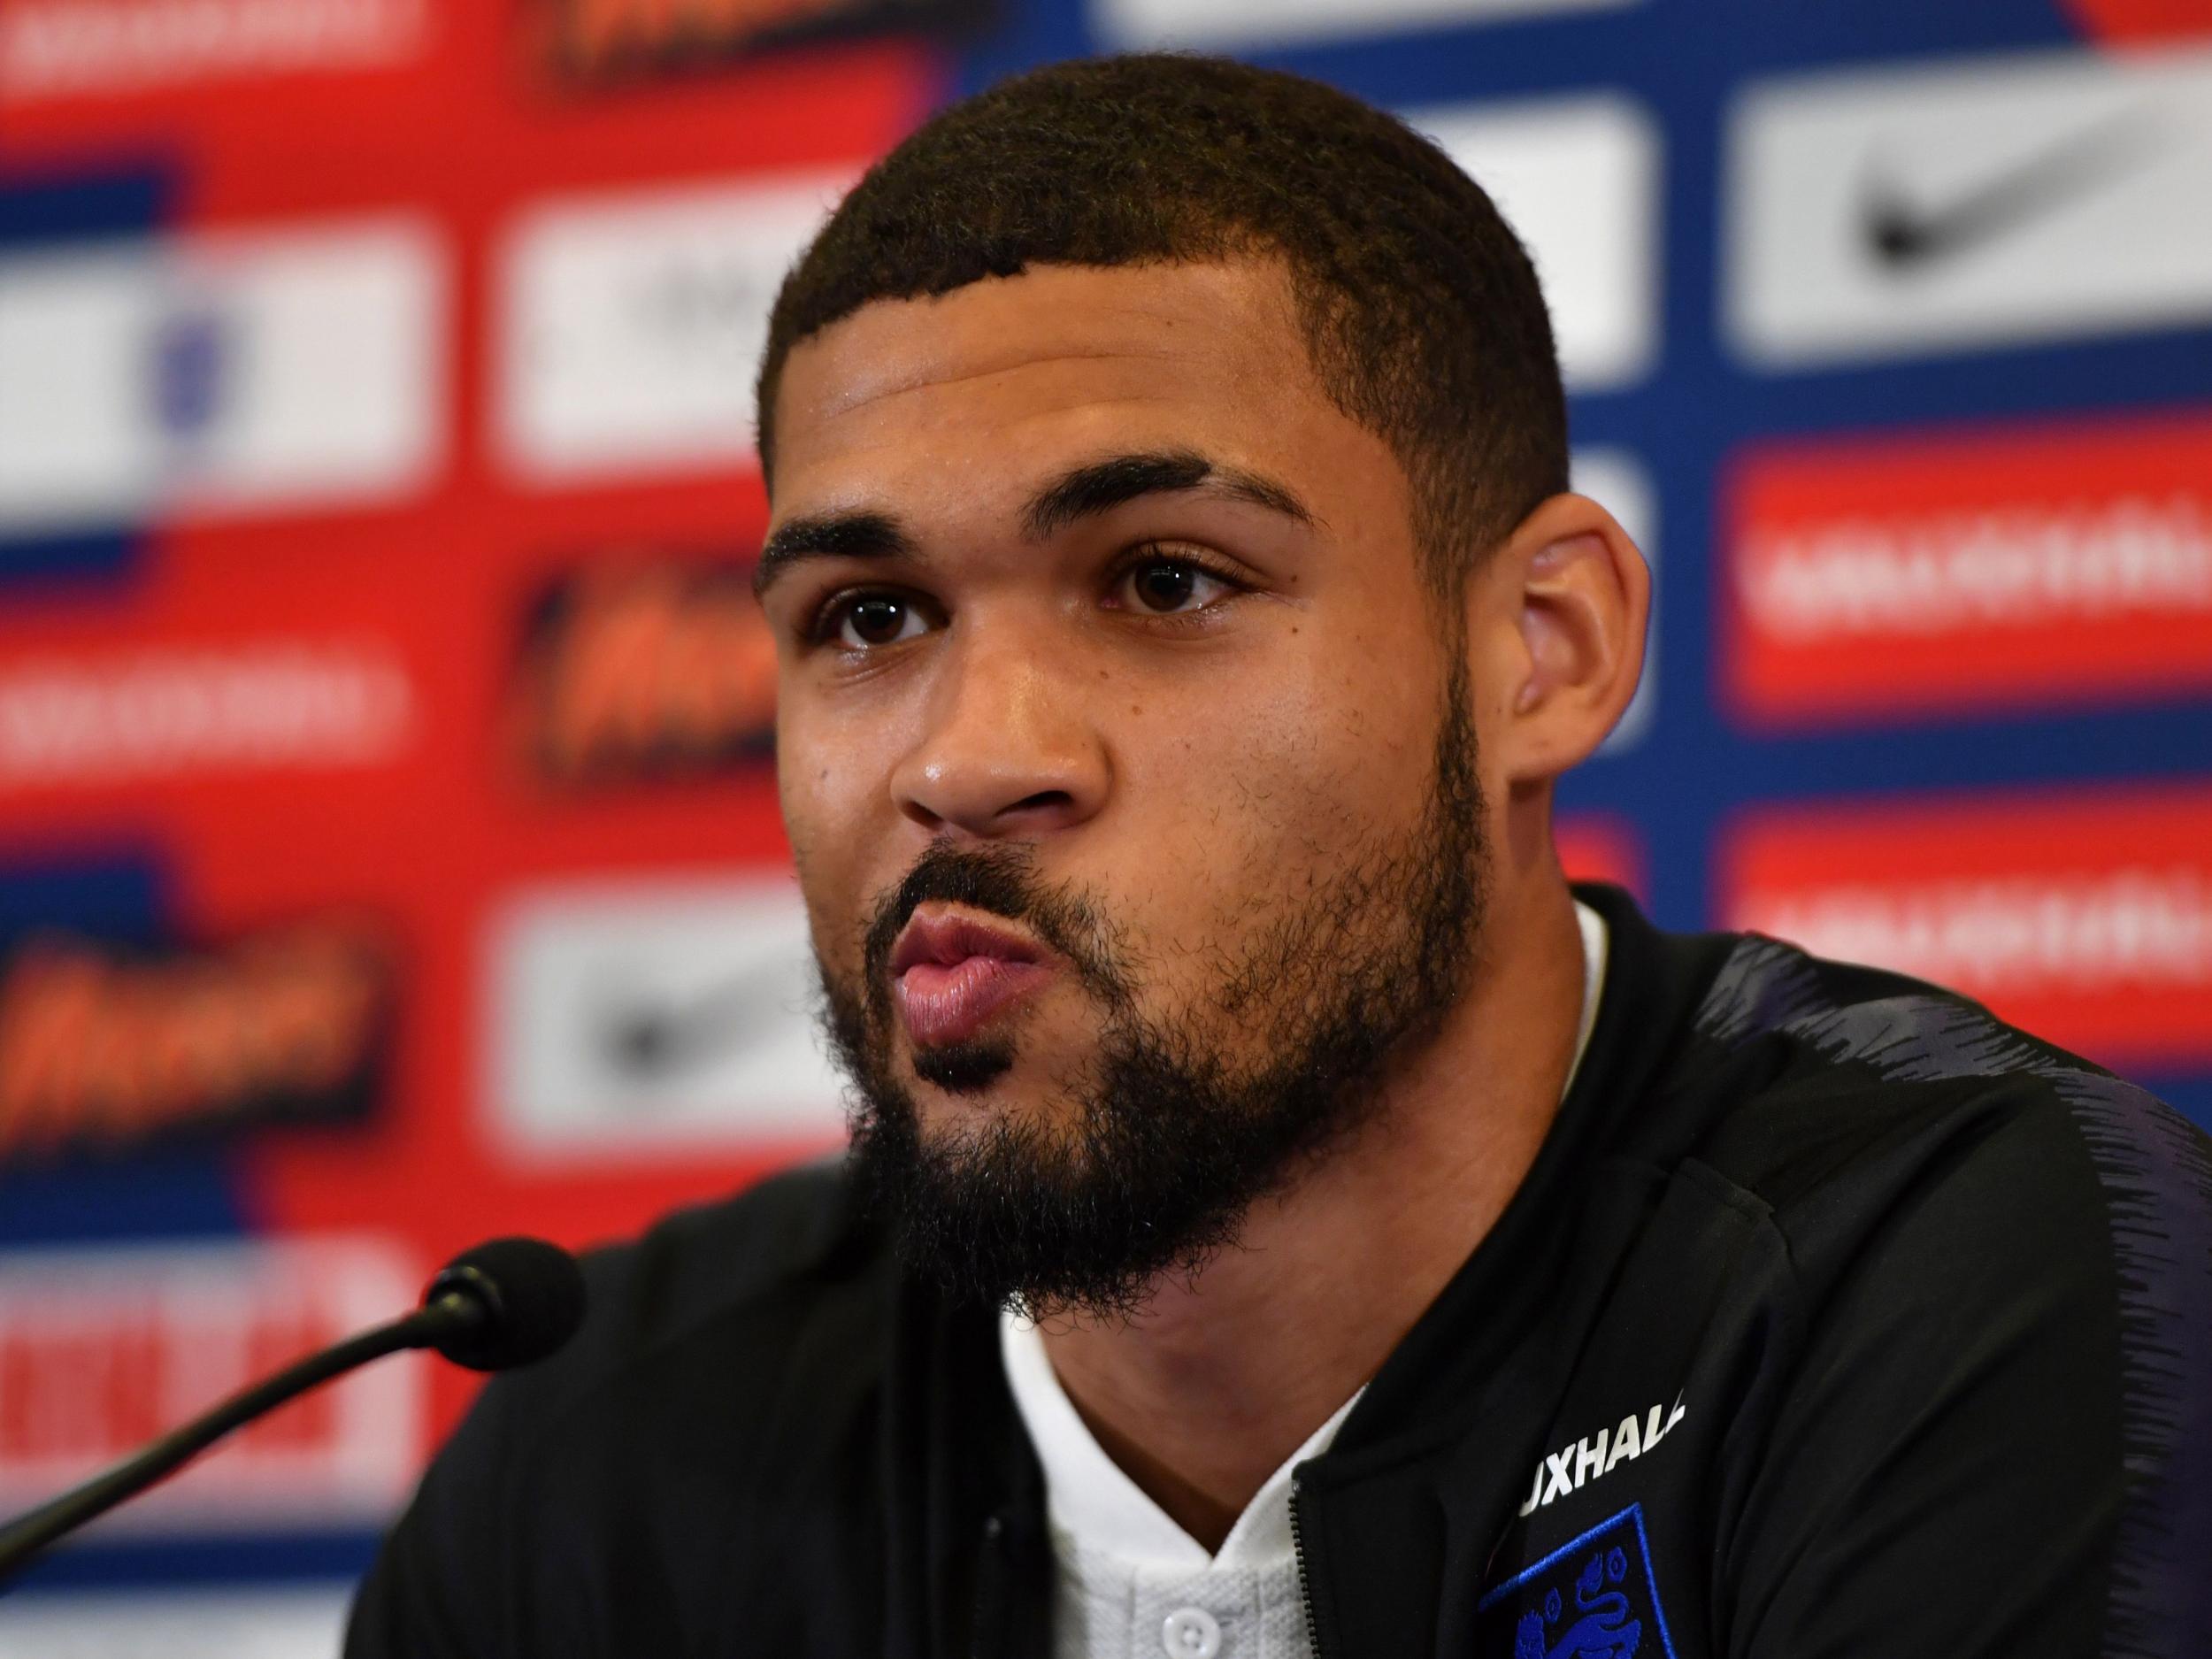 Loftus-Cheek was man of the match on his England debut